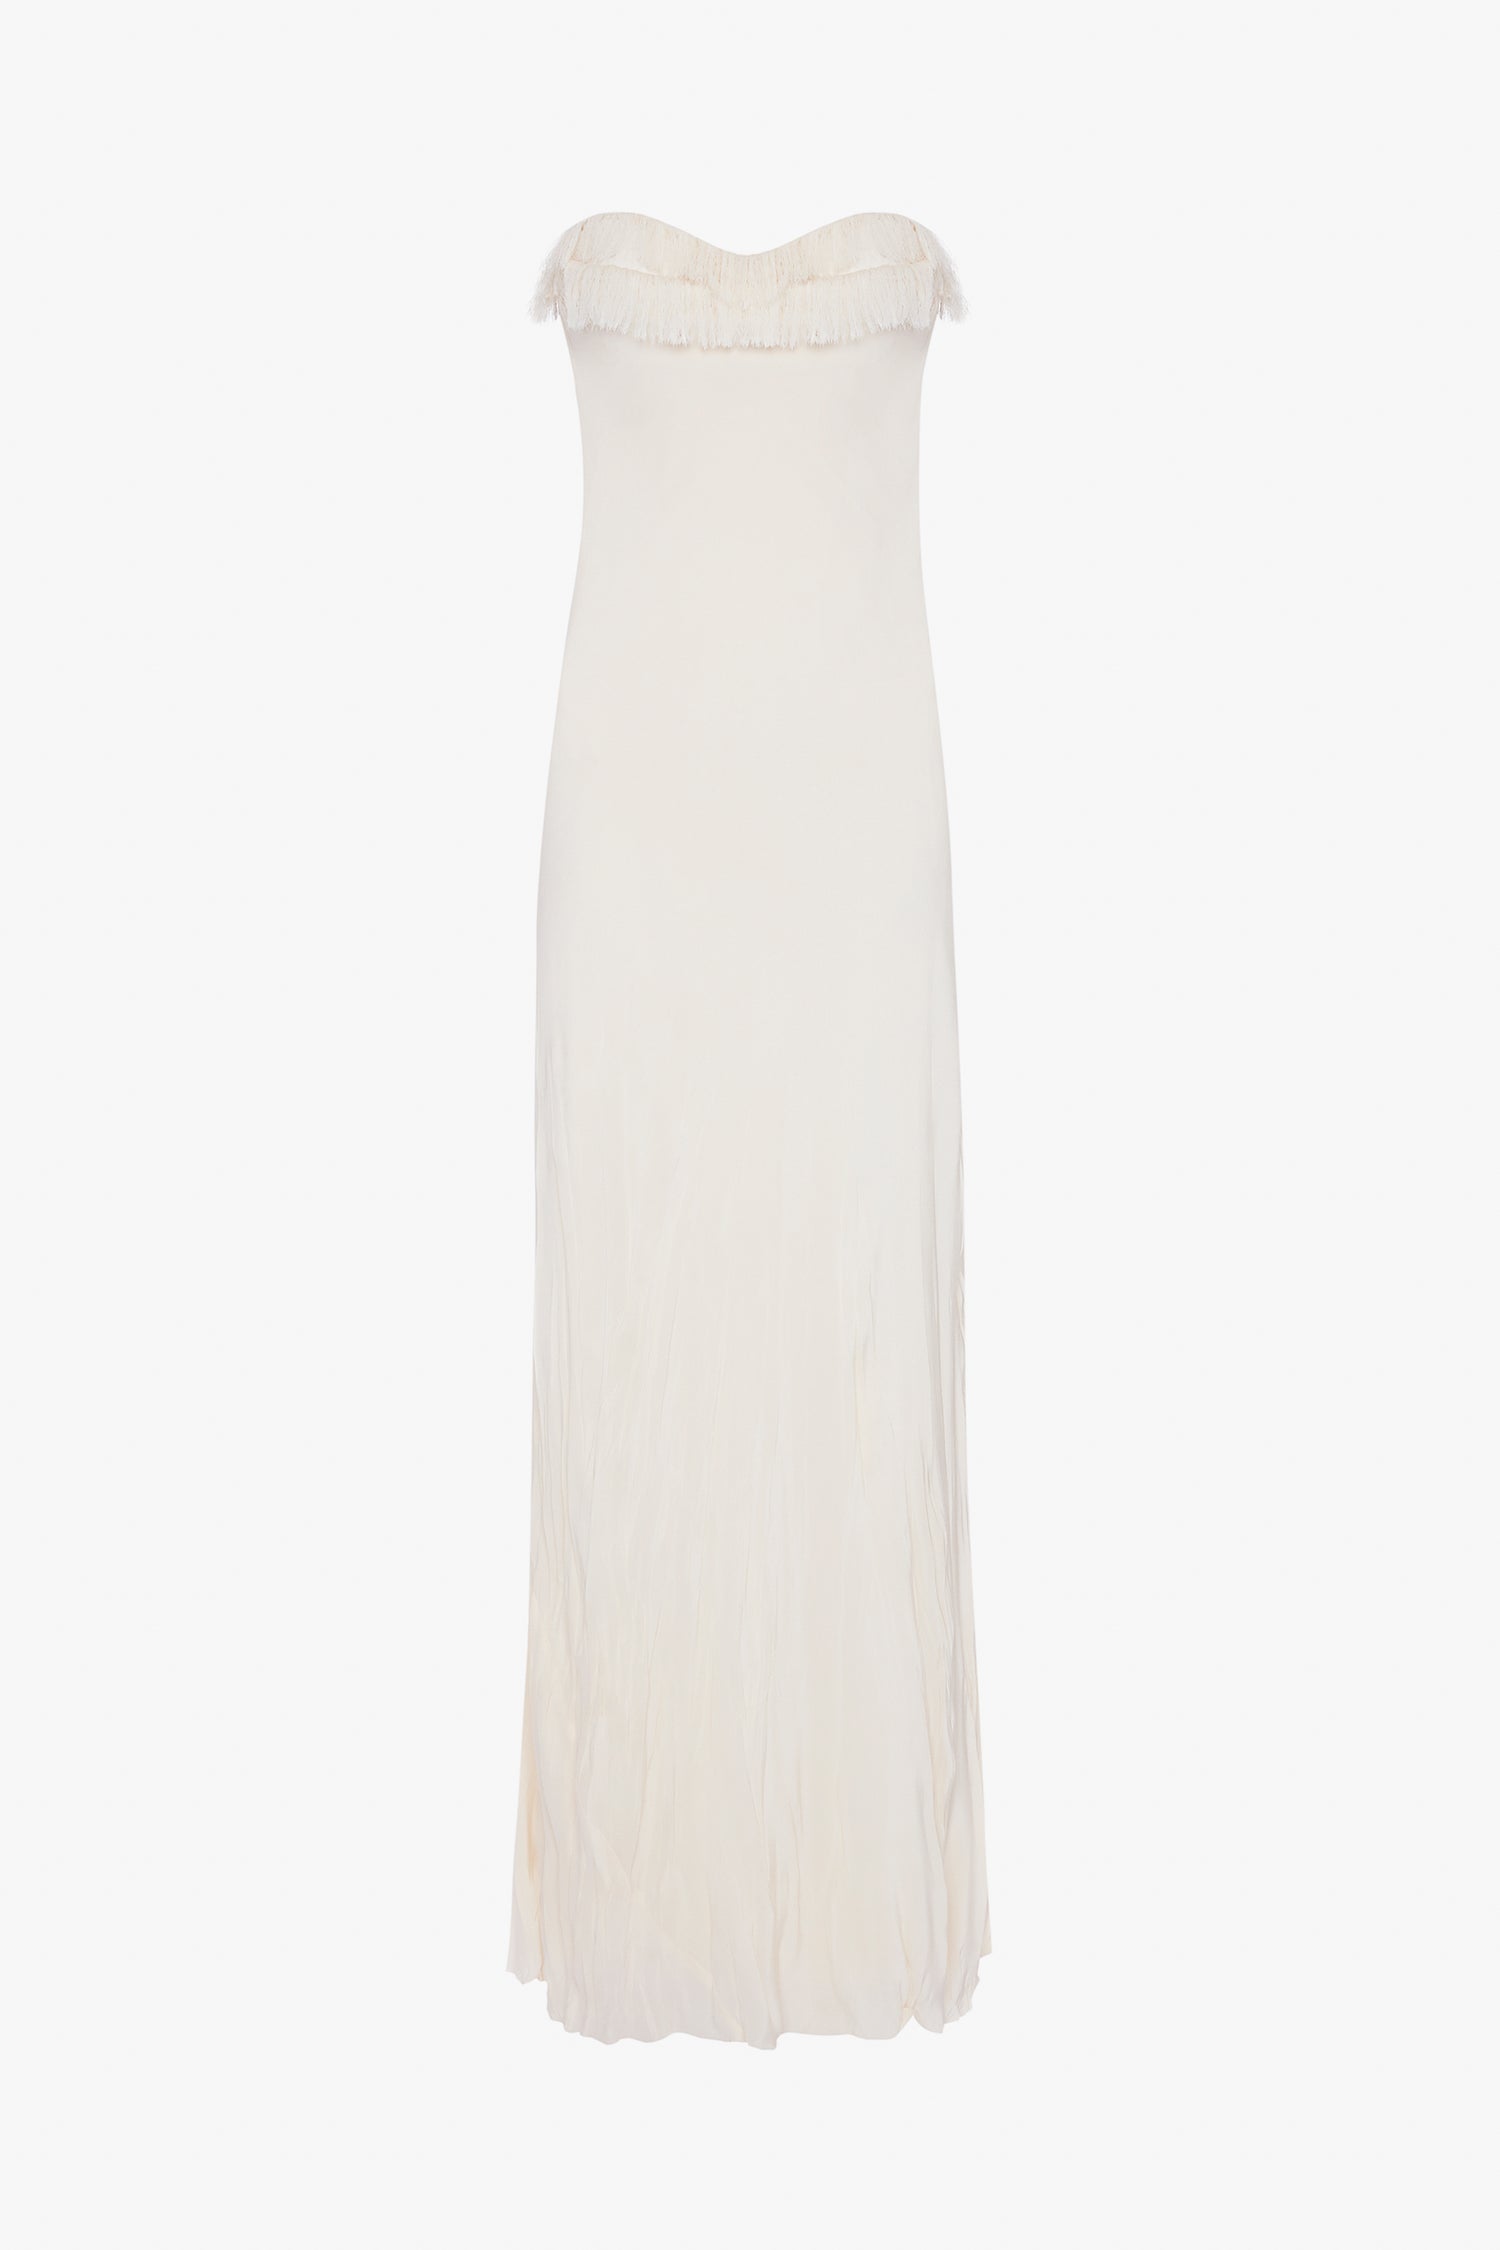 A plain, off-white maxi dress with a strapless sweetheart neckline and a slightly crinkled texture, displayed against a white background. 
Product Name: Victoria Beckham Exclusive Floor-Length Corset Detail Gown In Ivory